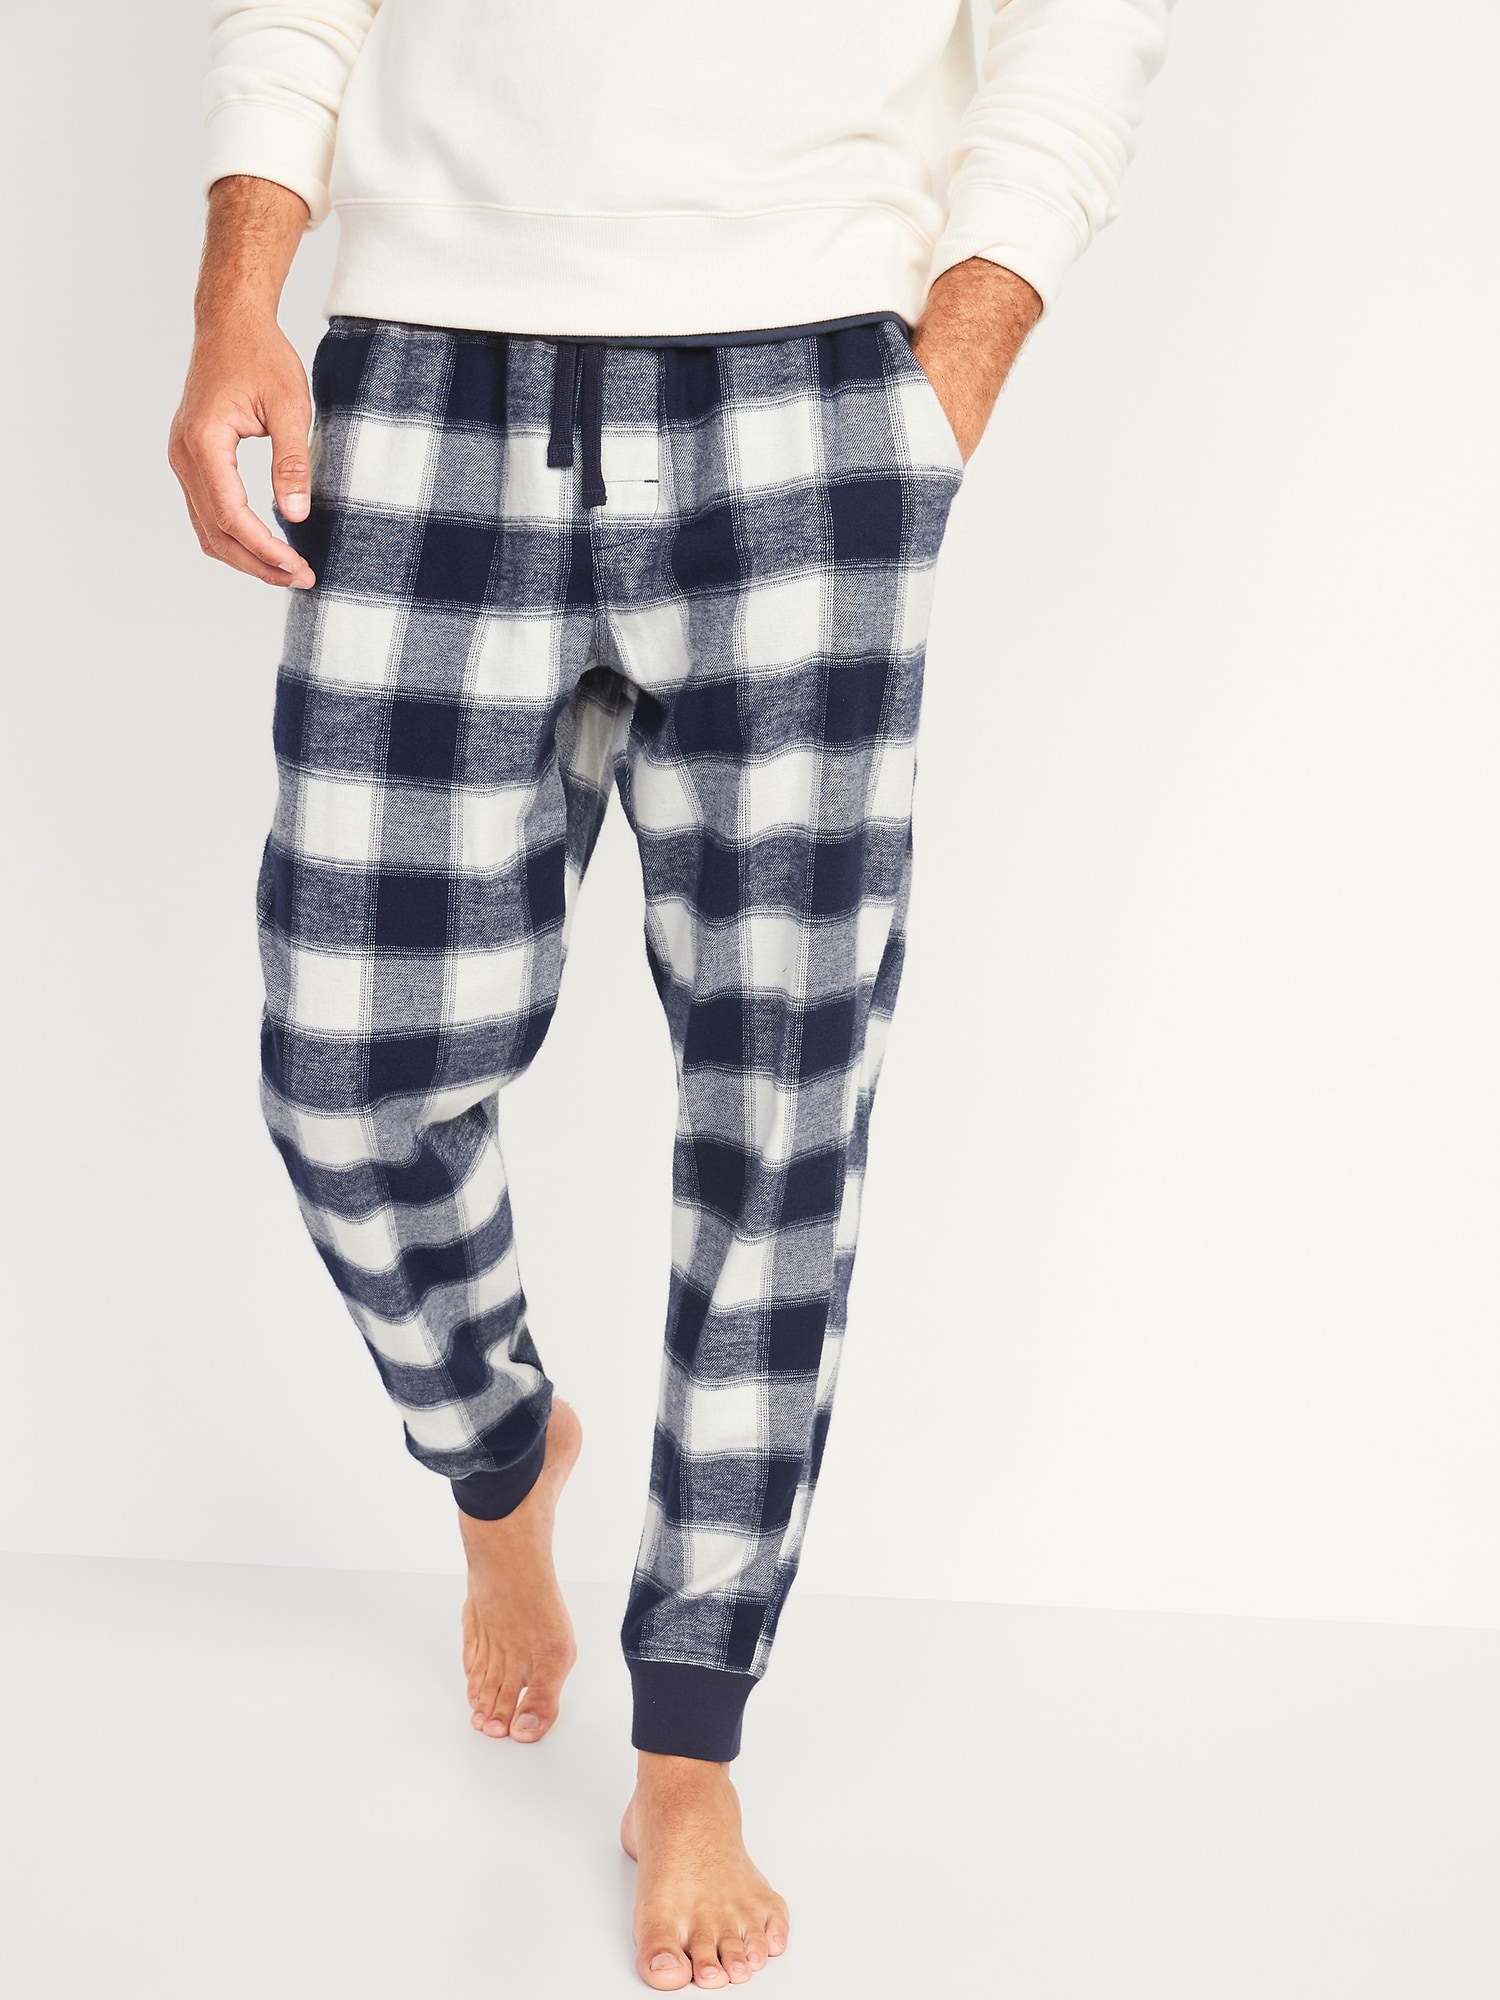 Matching Plaid Flannel Pajama Pants, Old Navy